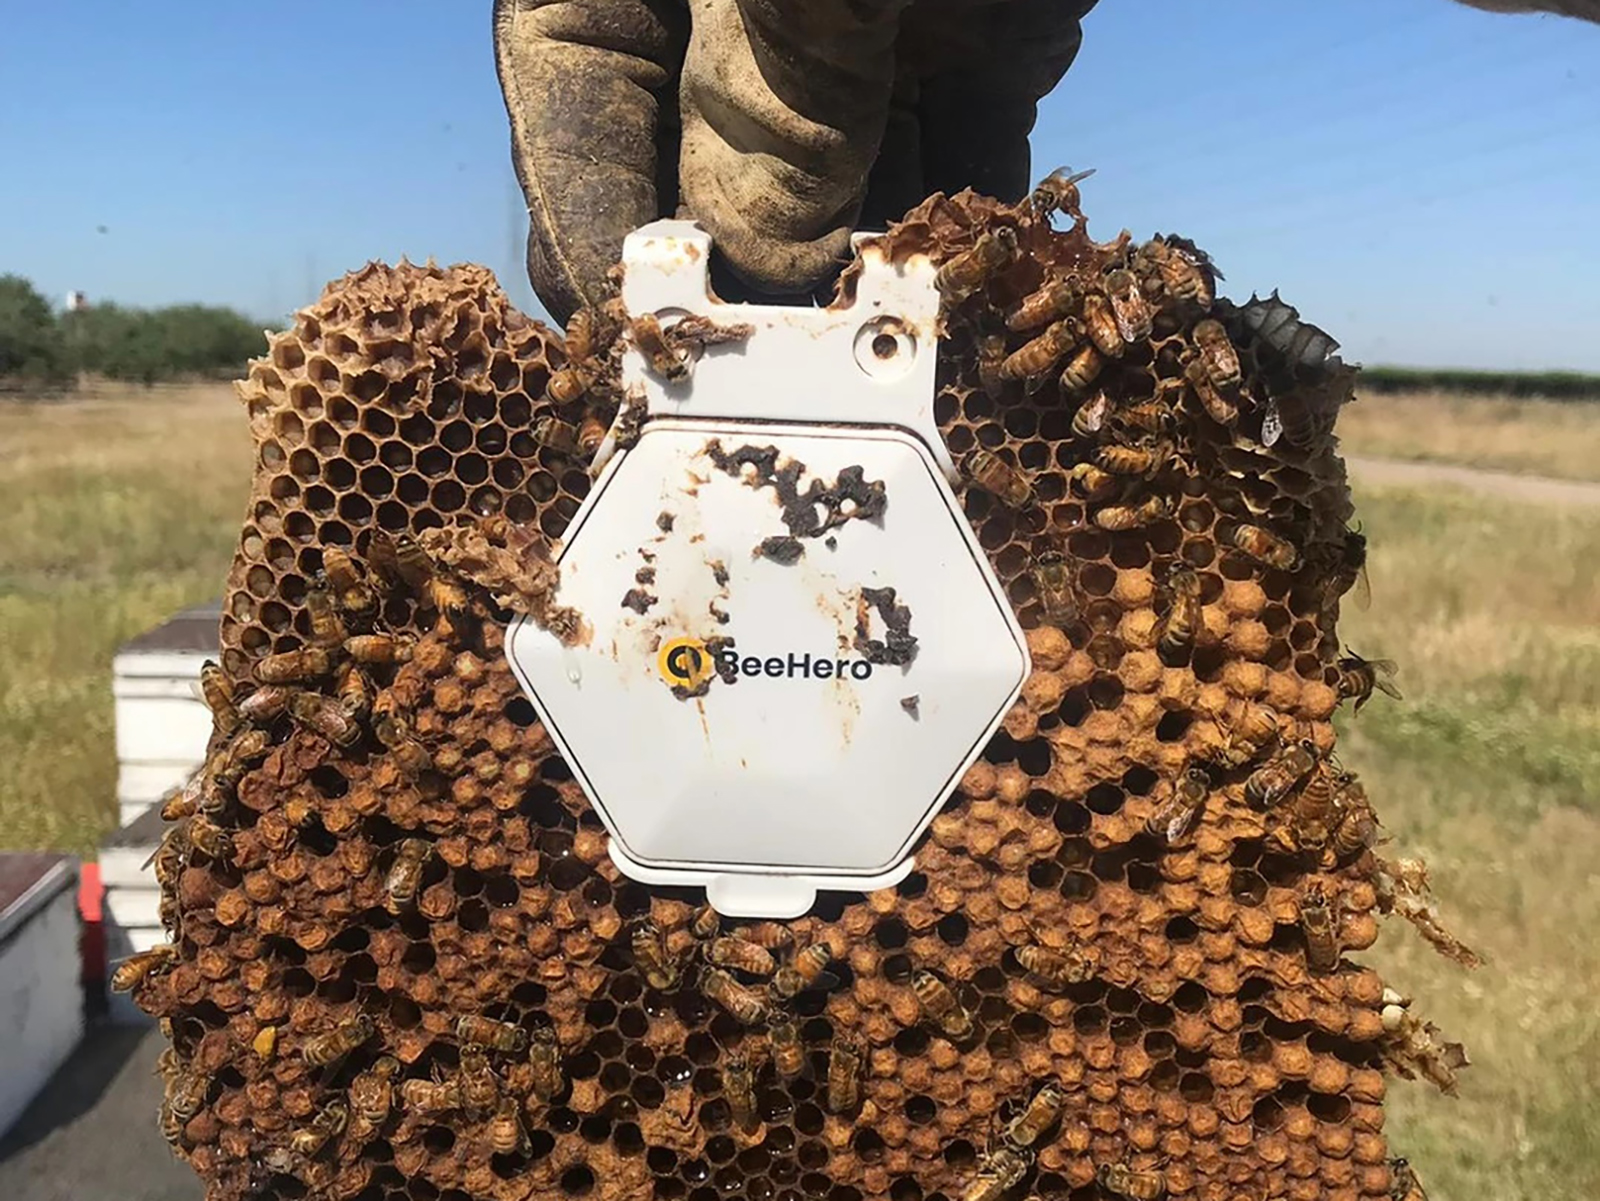 A BeeHero gardening tech device clipped onto a honeycomb filled with bees